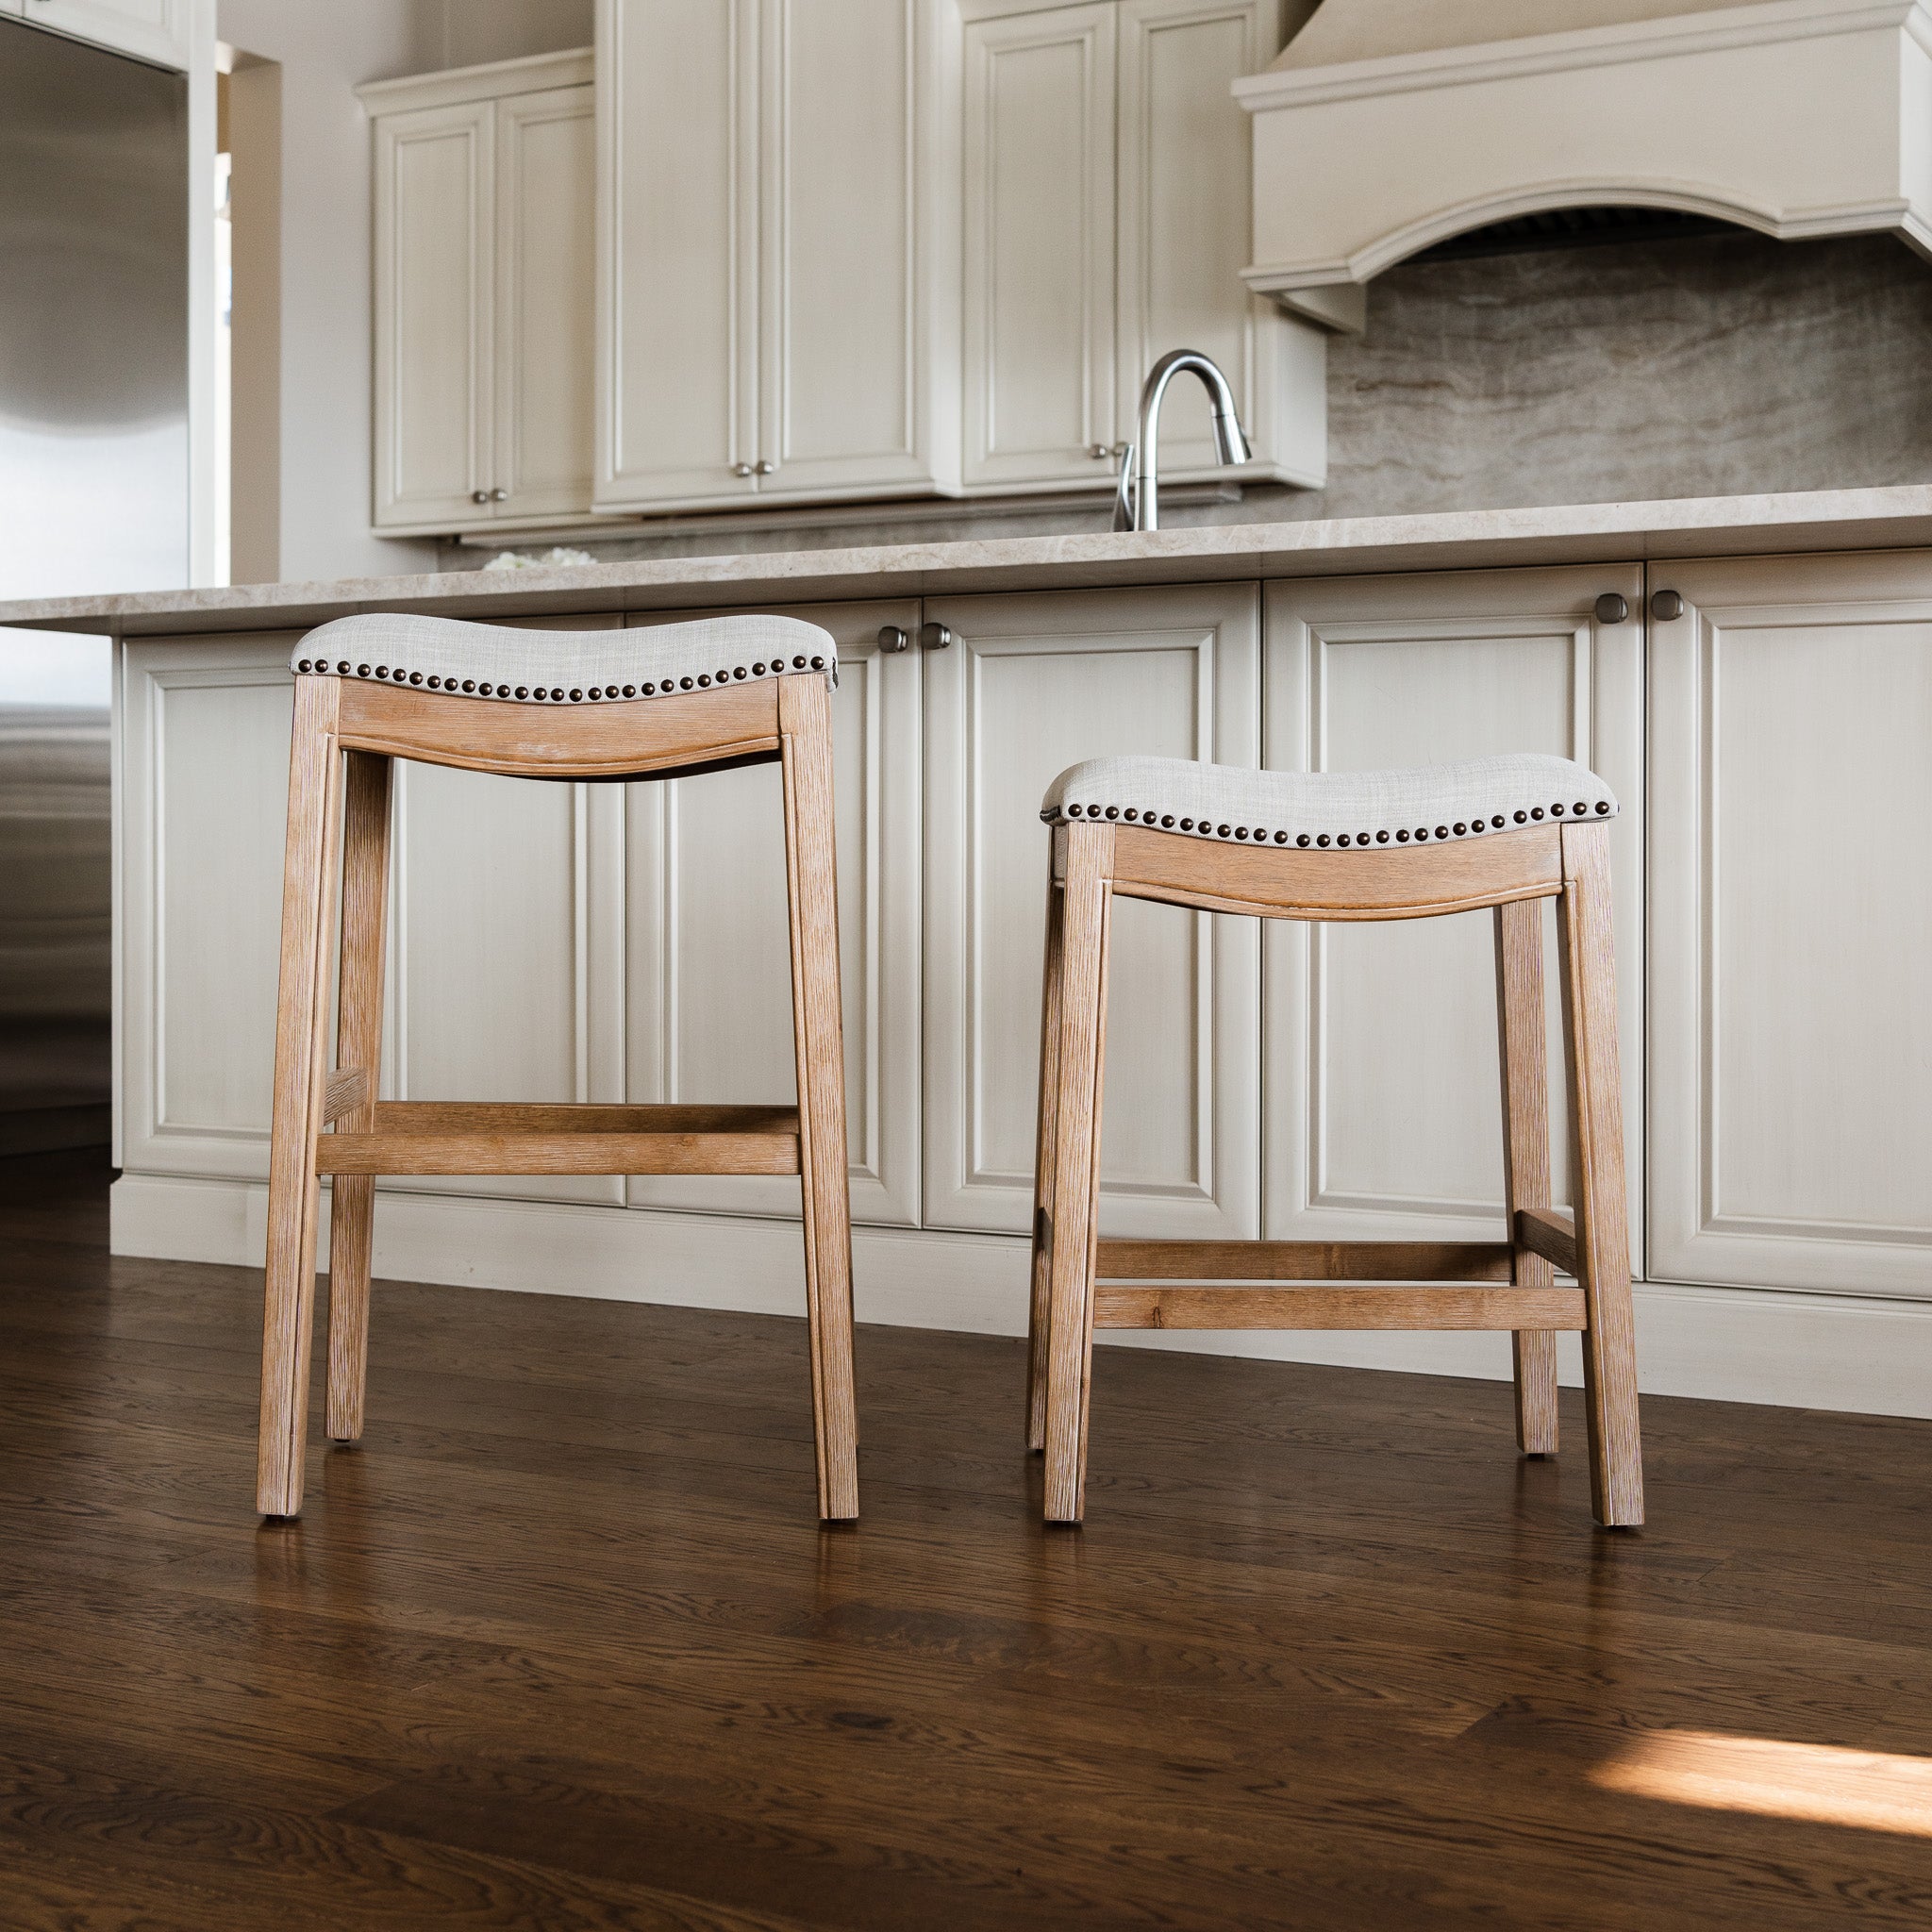 Adrien Saddle Counter Stool in Weathered Oak Finish with Sand Color Fabric Upholstery in Stools by Maven Lane